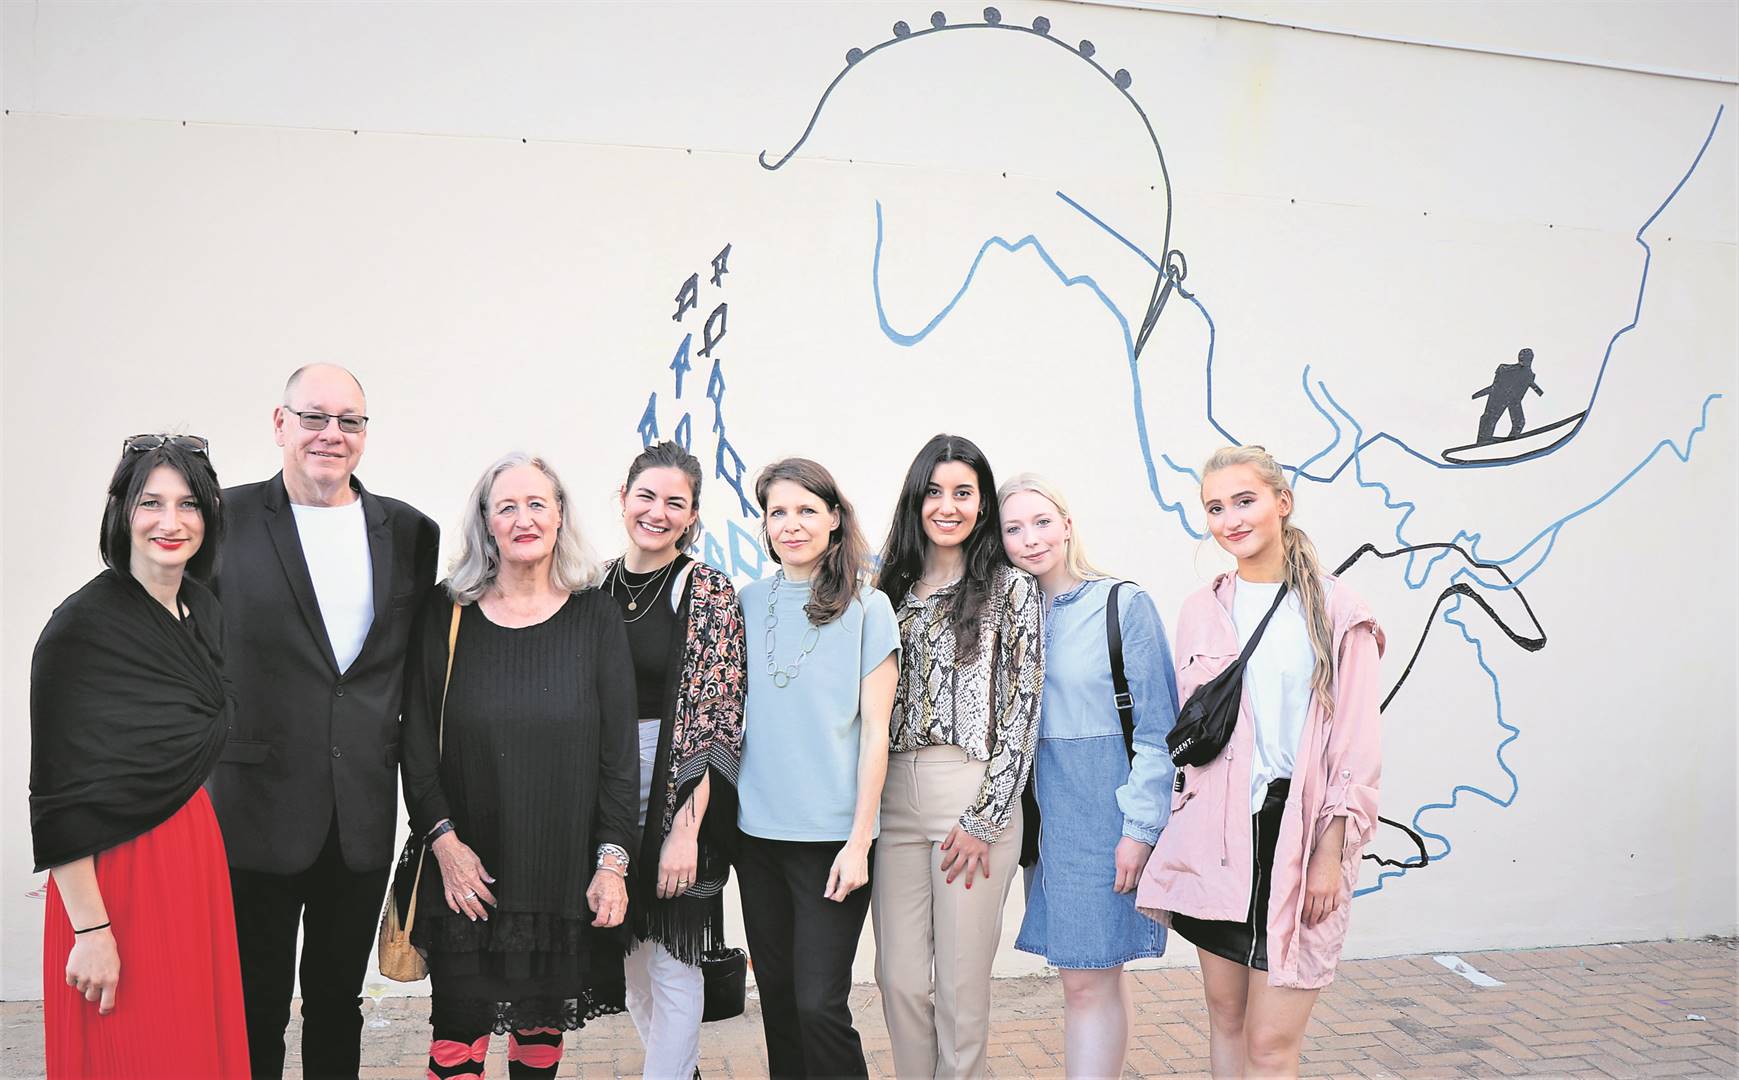 Art students from the University of Duisburg-Essen, in conjunction with The Village of Dreams, presented a unique tape art project on a public wall in Jeffreys Bay to highlight the ongoing drought across the region. With the students are Kouga Speaker, Brenton Williams (second from left) and local artist, Zuanda Badenhorst (third from left) from The Village of Dreams.